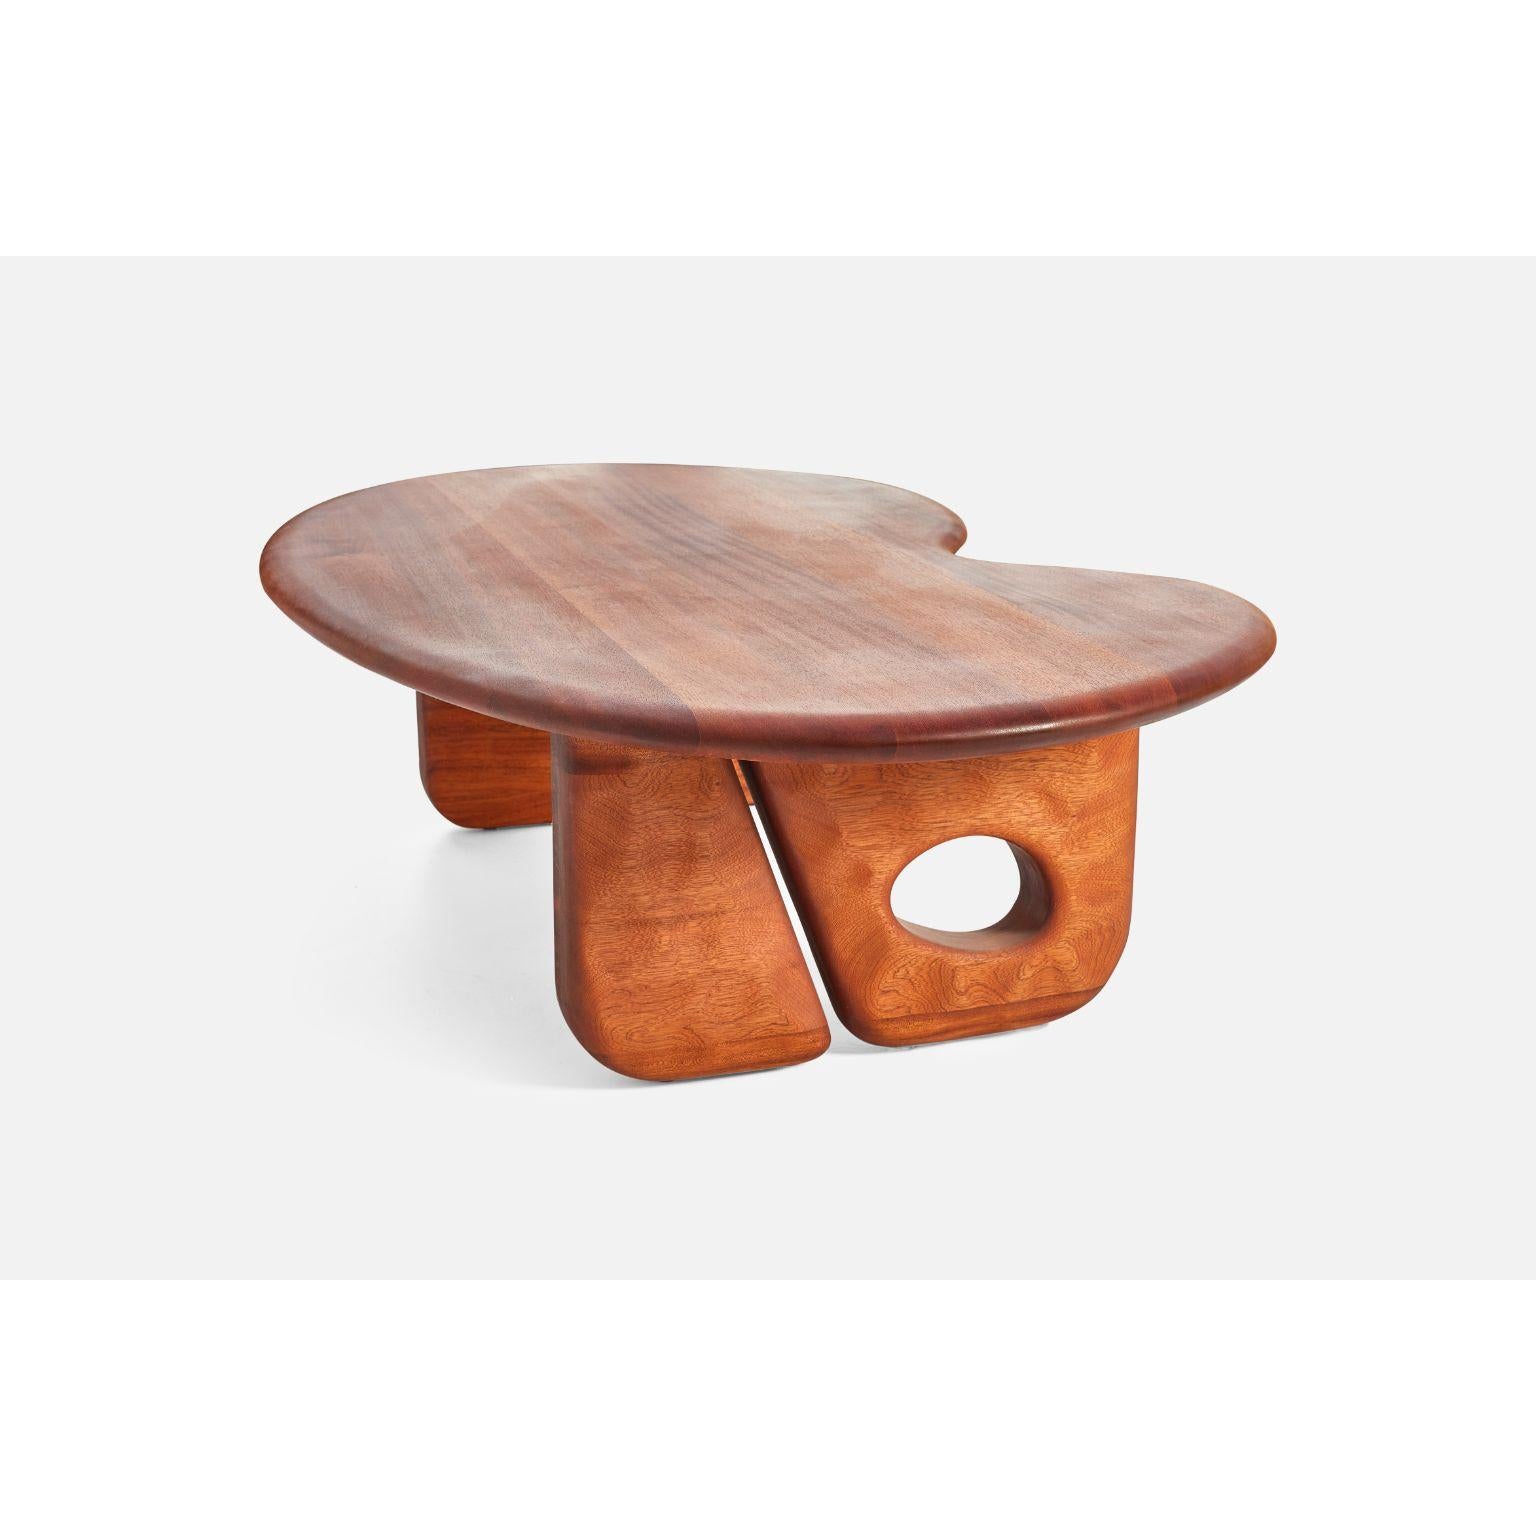 Turc Avasin Low Table by Contemporary Ecowood en vente